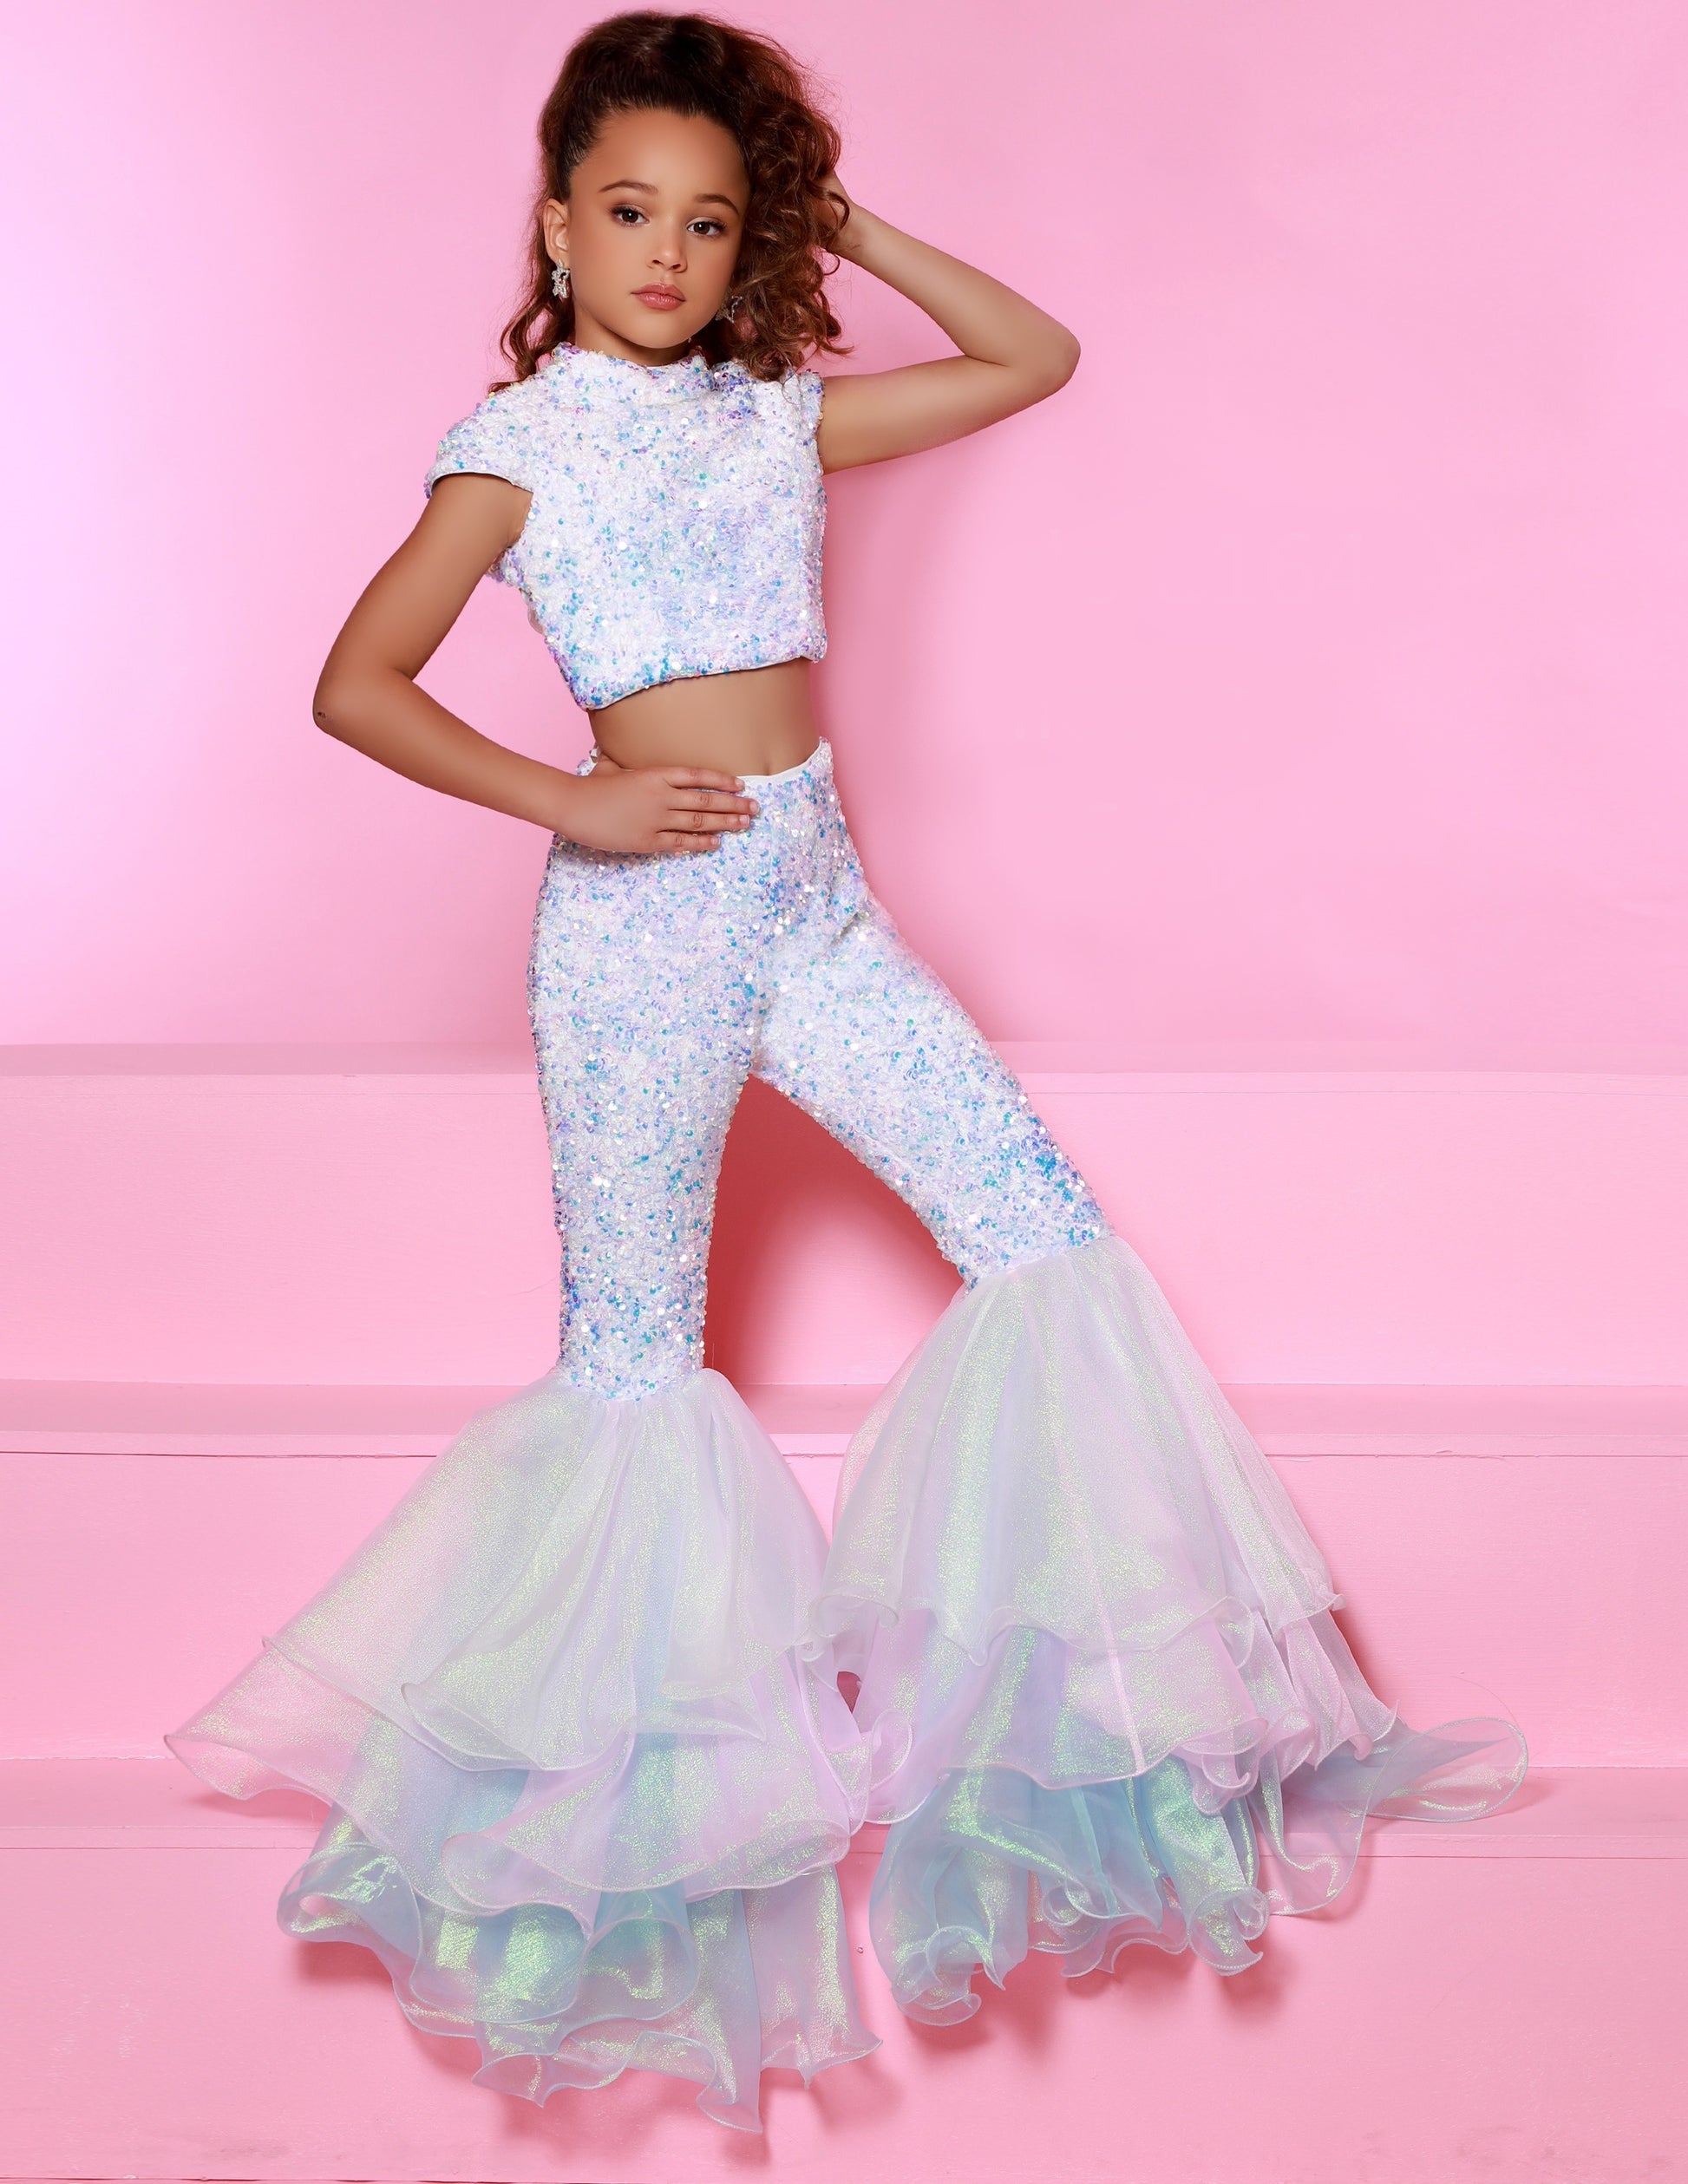 Sugar Kayne C164 This is a two piece girls fun fashion jumpsuit. Featuring Sequin stretch velvet fabric not only is it comfortable but glamorous on stage! high neckline with short sleeves, Backless with an organza bow to tie. Lush Bell Bottoms. Unicorn color features iridescent shimmer organza while royal and red feature regular organza.  Colors: Unicorn, Red, Royal  Sizes:  2-16  (Sizes 2-6 do not have bust cups, Sizes 8-16 will have preteen size bust cups)